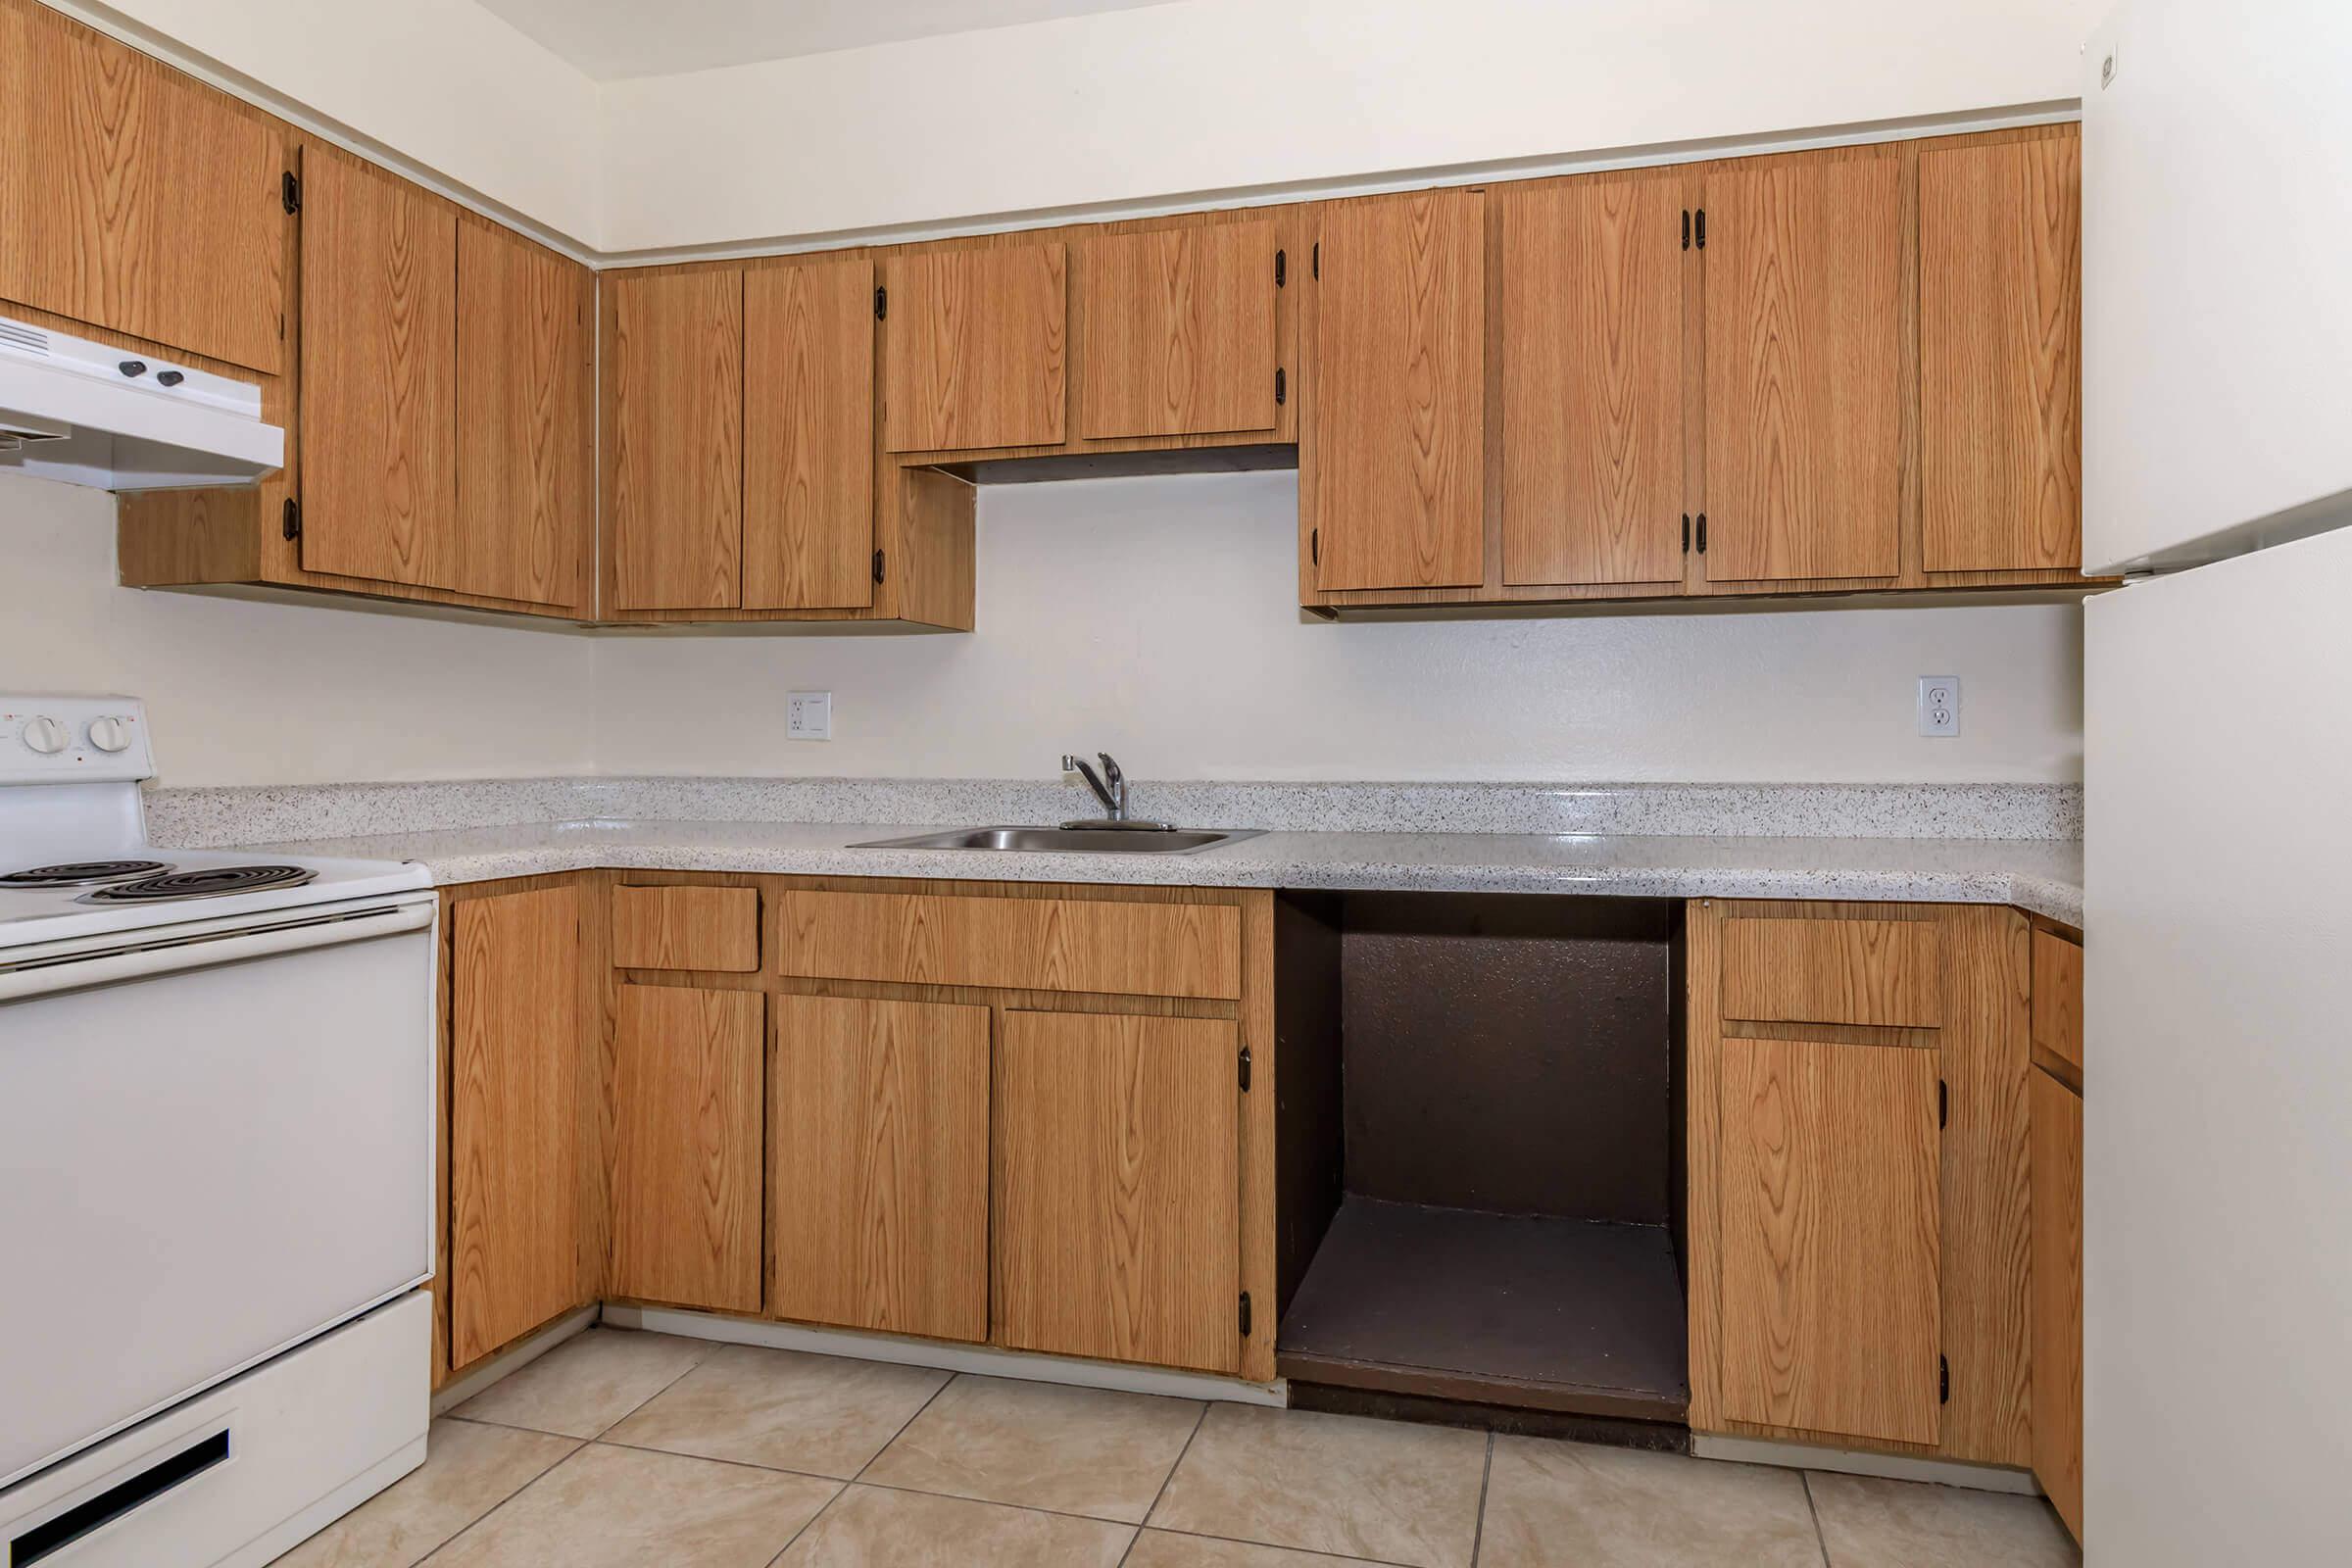 a kitchen with a stove refrigerator and wooden cabinets